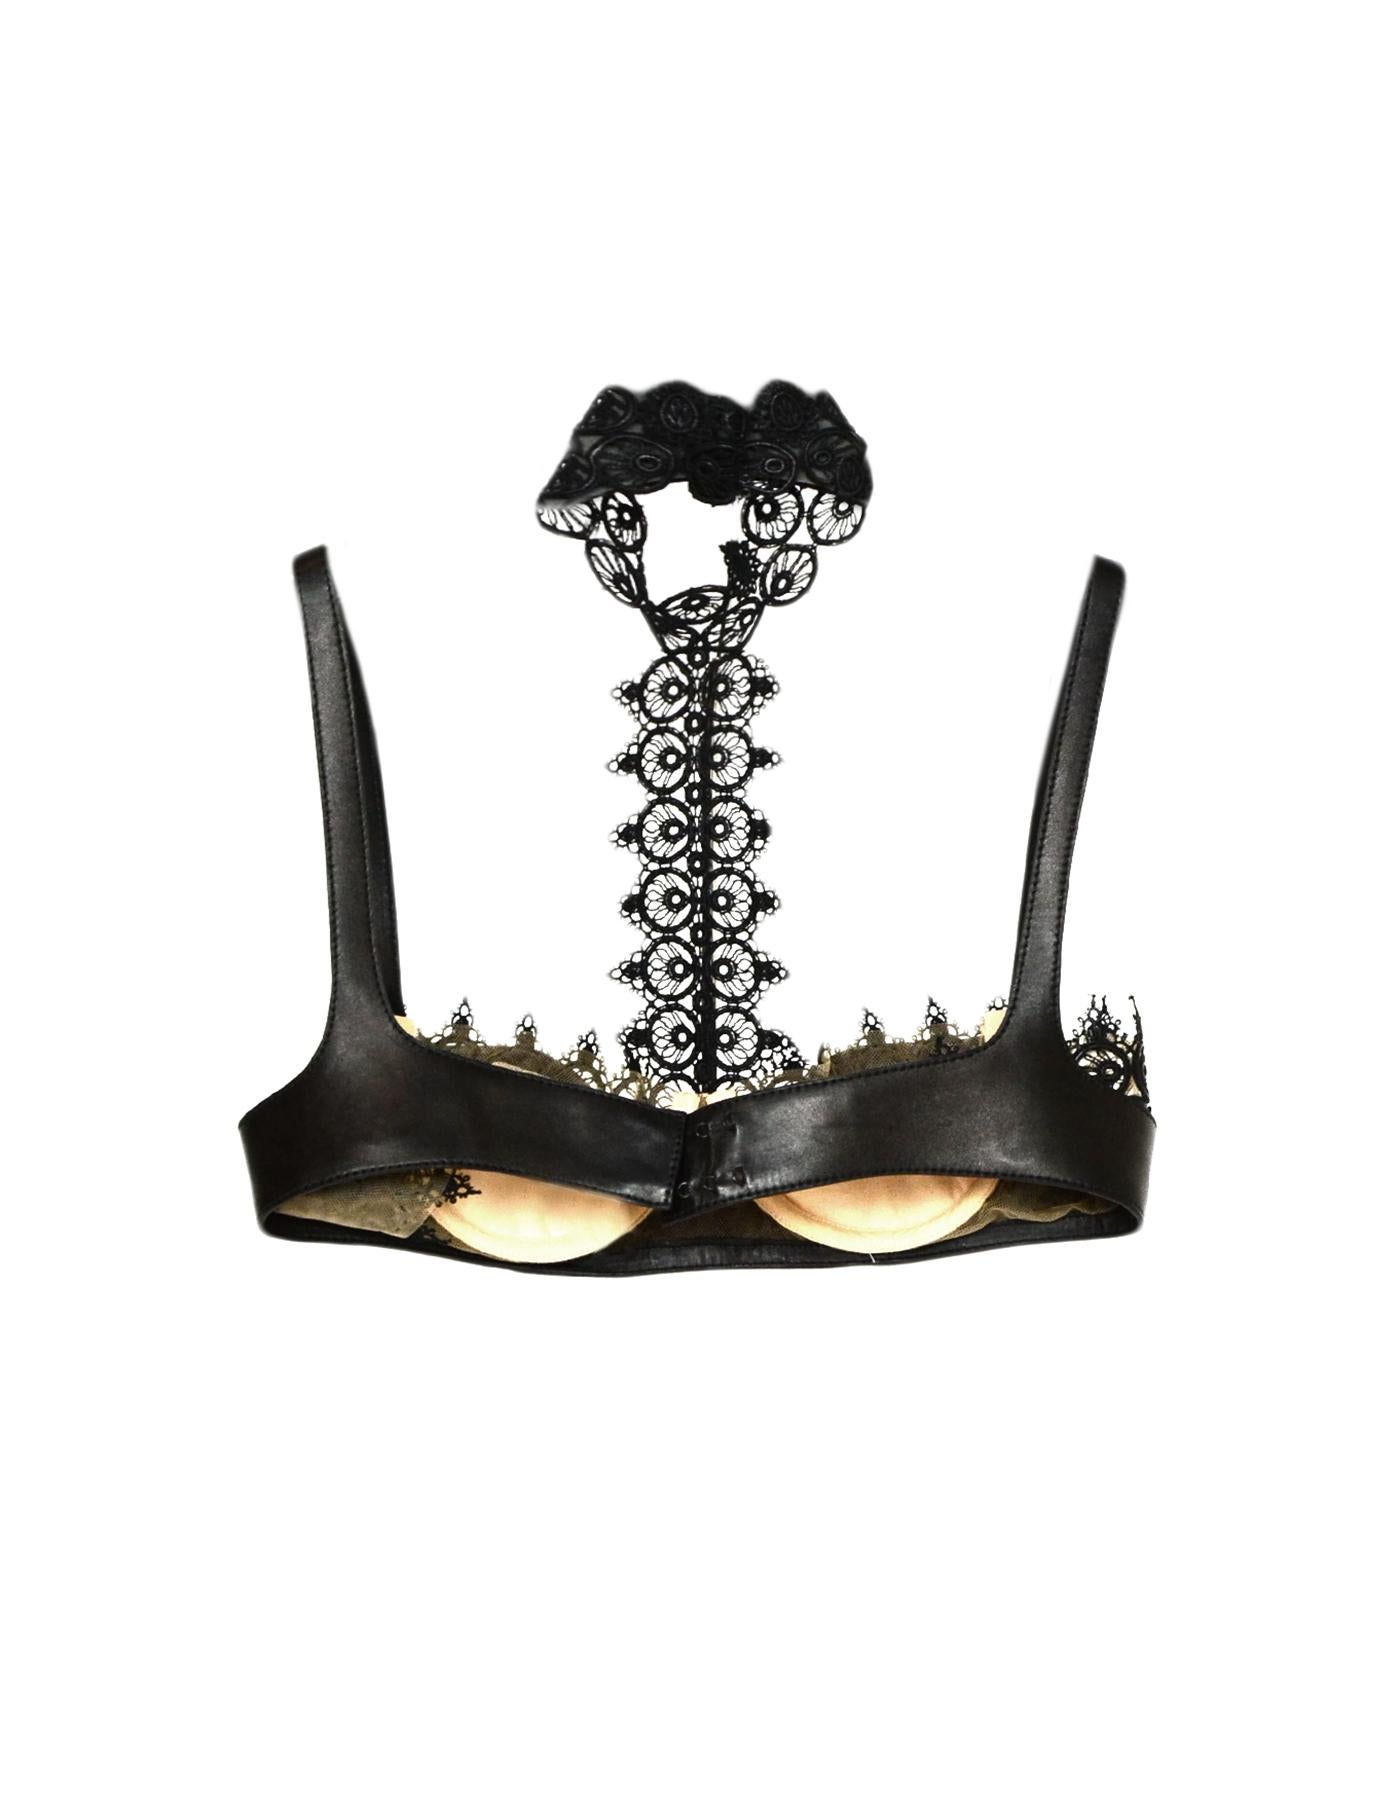 Alexander McQueen Black Leather Halter-Neck Bra Top with Lace Detail

Made In: Italy
Color: Black
Materials: Leather
Lining: Lace
Opening/Closure: Bra hook
Overall Condition: Excellent pre-owned condition
Estimated Retail: $2,775 + tax
Includes: